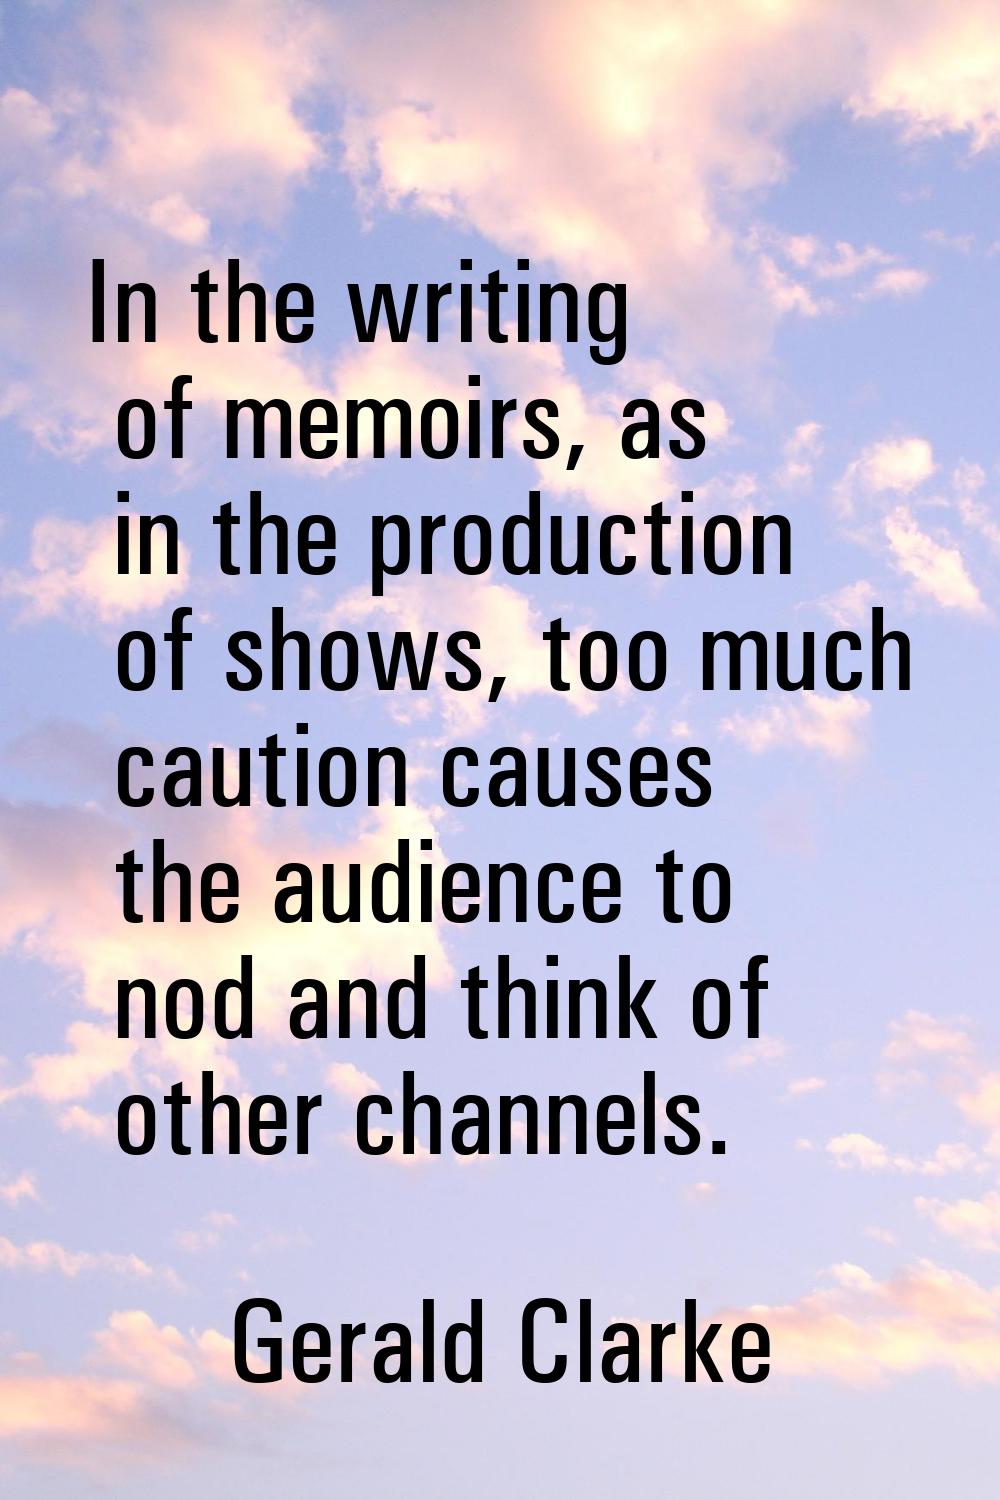 In the writing of memoirs, as in the production of shows, too much caution causes the audience to n